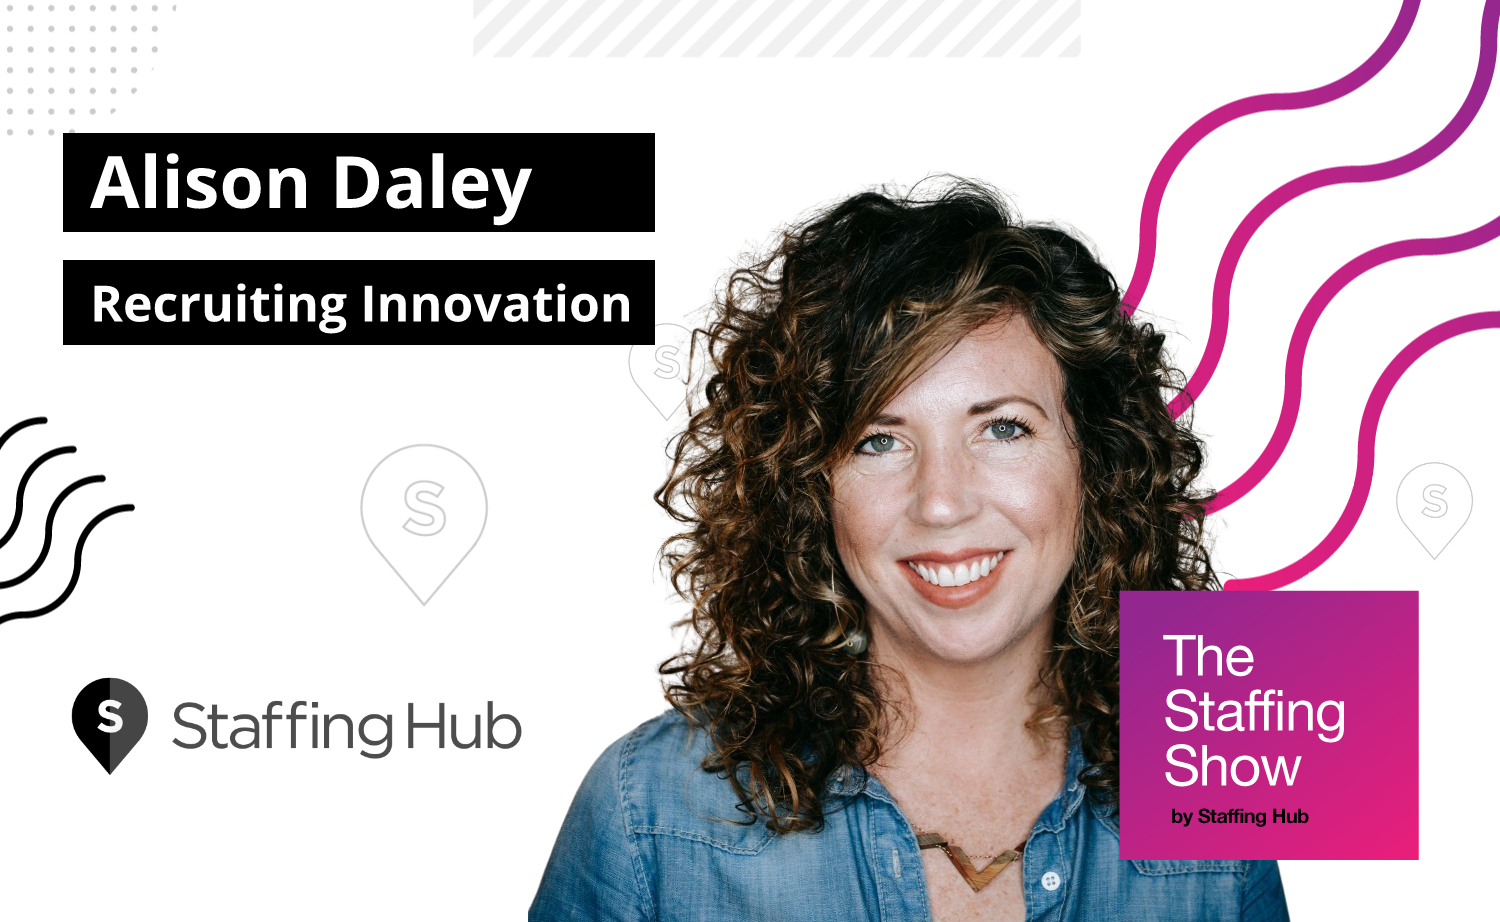 Alison Daley, Founder and CEO of Recruiting Innovation, on Creating a Recruiter Training Program